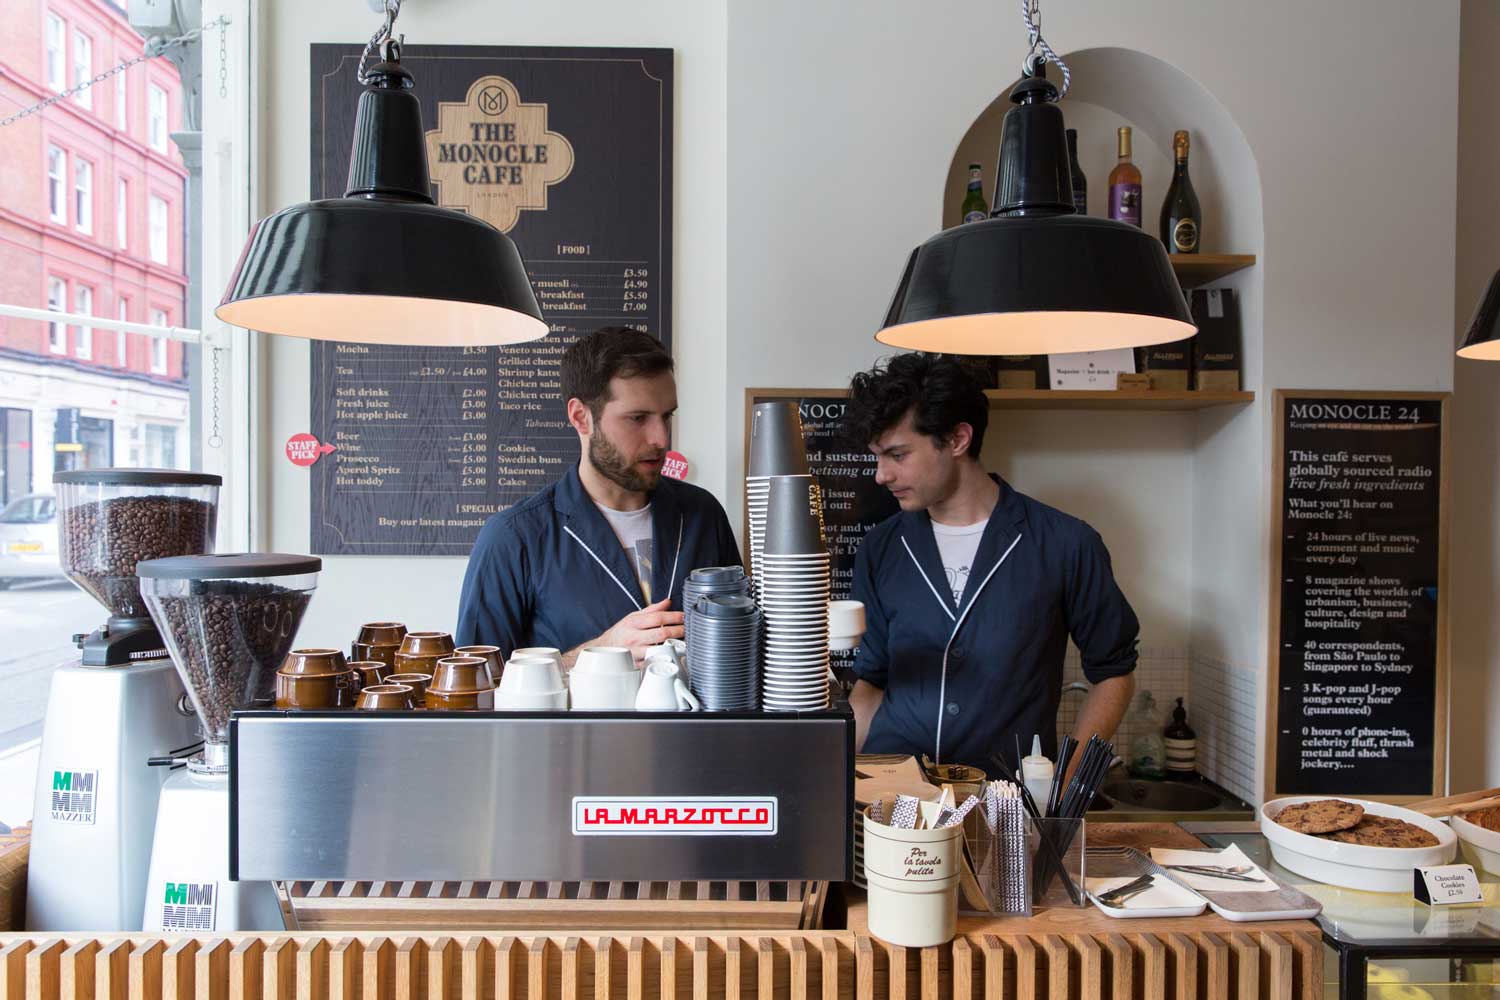 5. Beautiful Cafes in London - Monocle